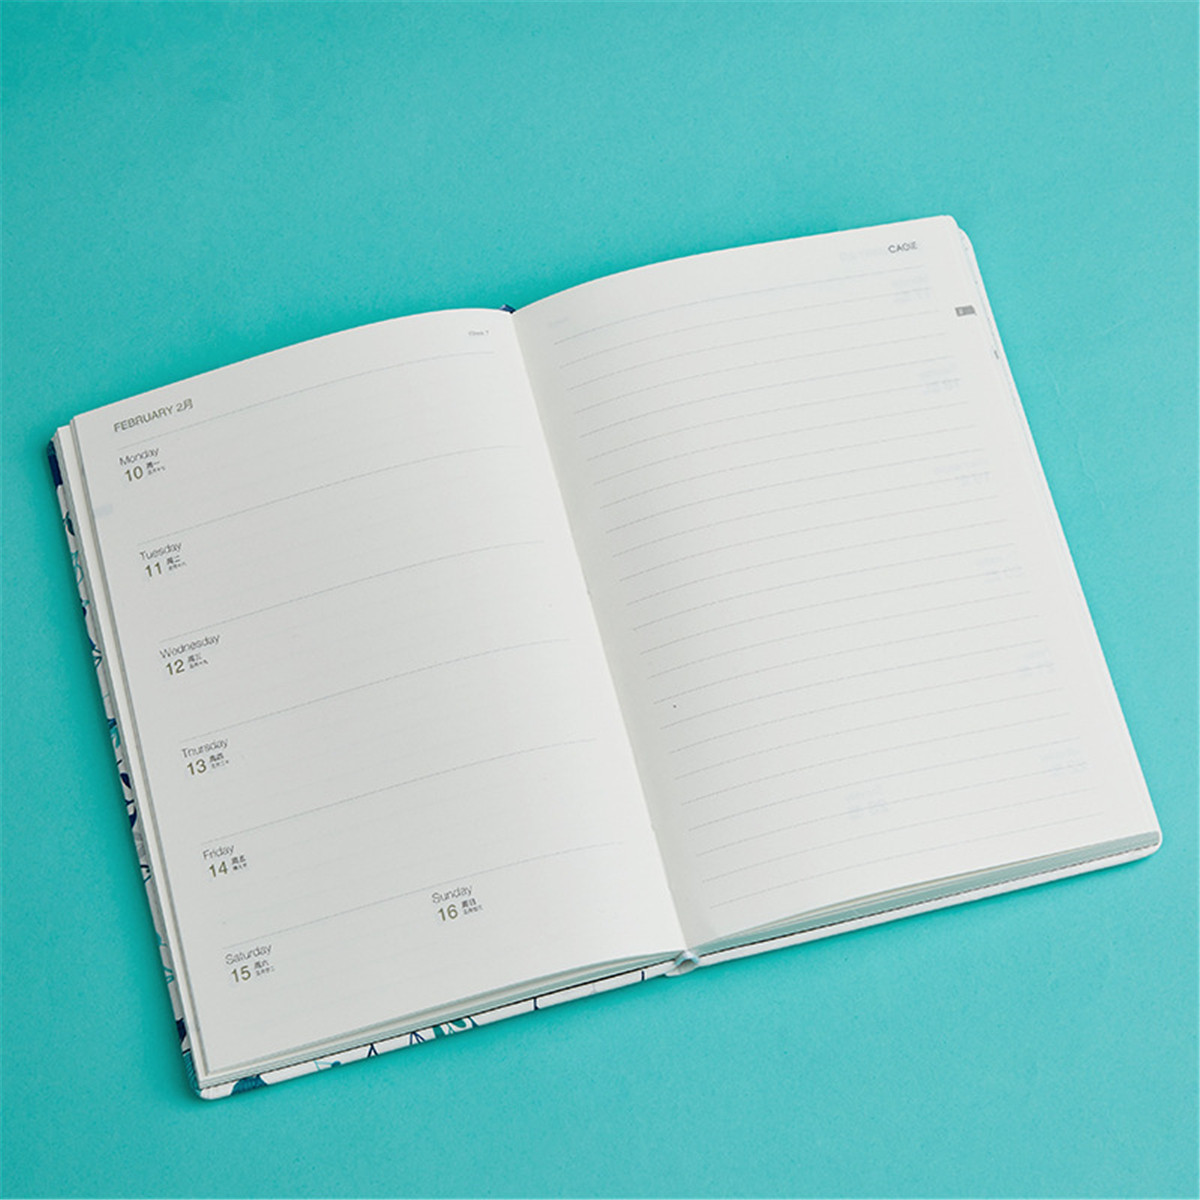 2019-2020-Weekly-Monthly-Agenda-Planner-Monthly-Weekly-Plan-Portable-Notebook-Cute-Diary-Flower-Sche-1530952-4